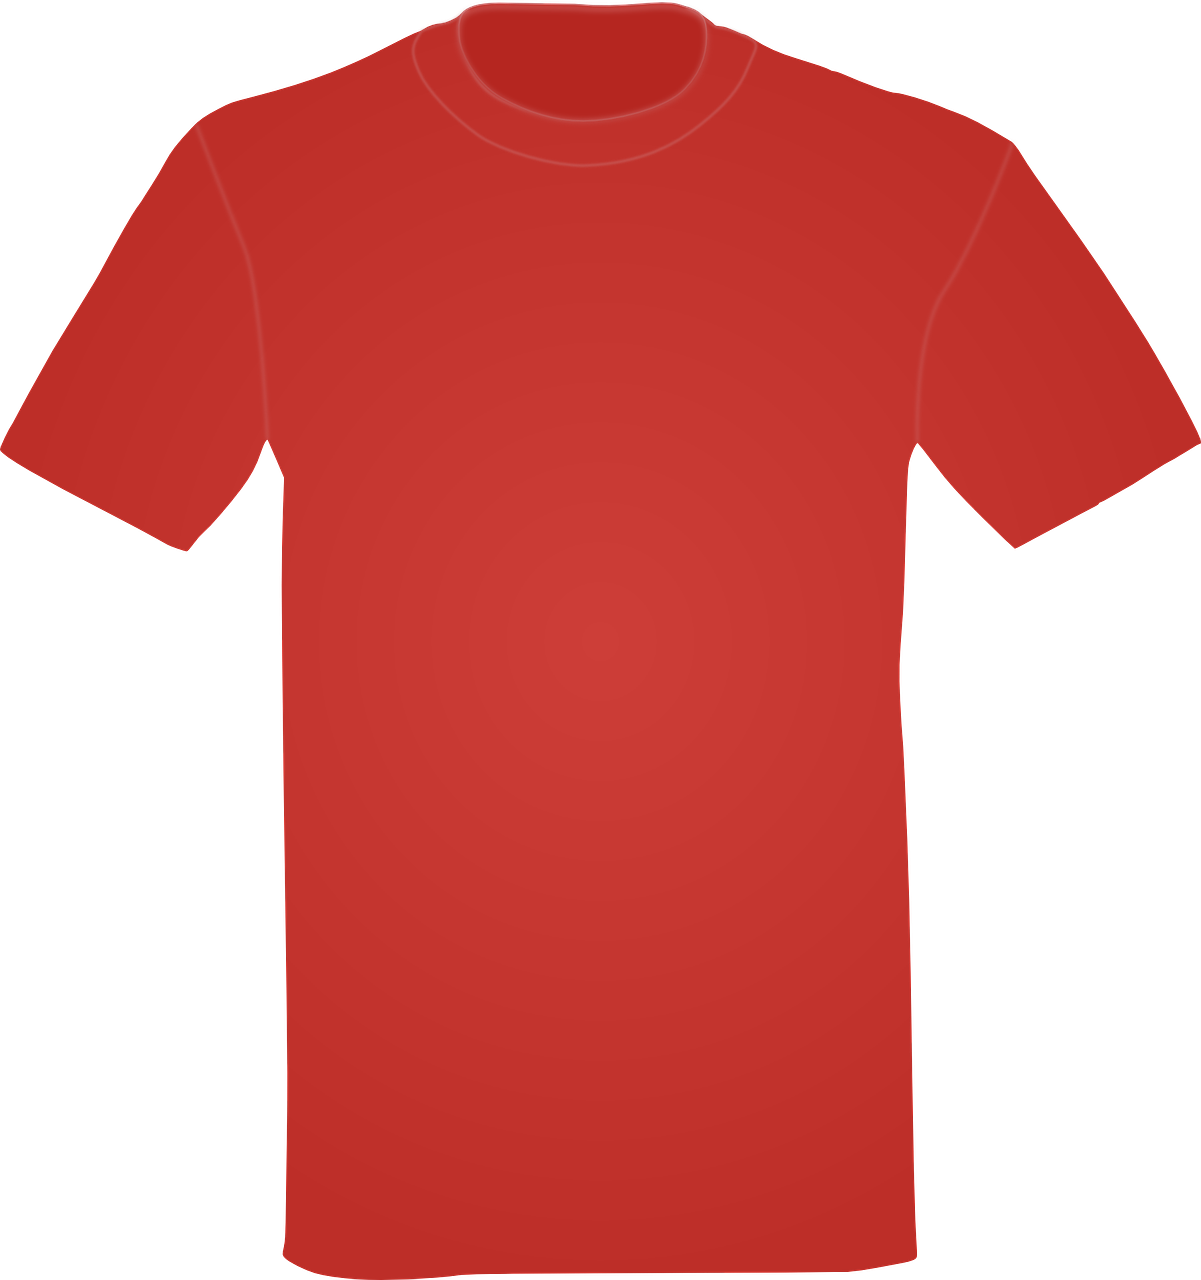 Plain Red T Shirt Graphic